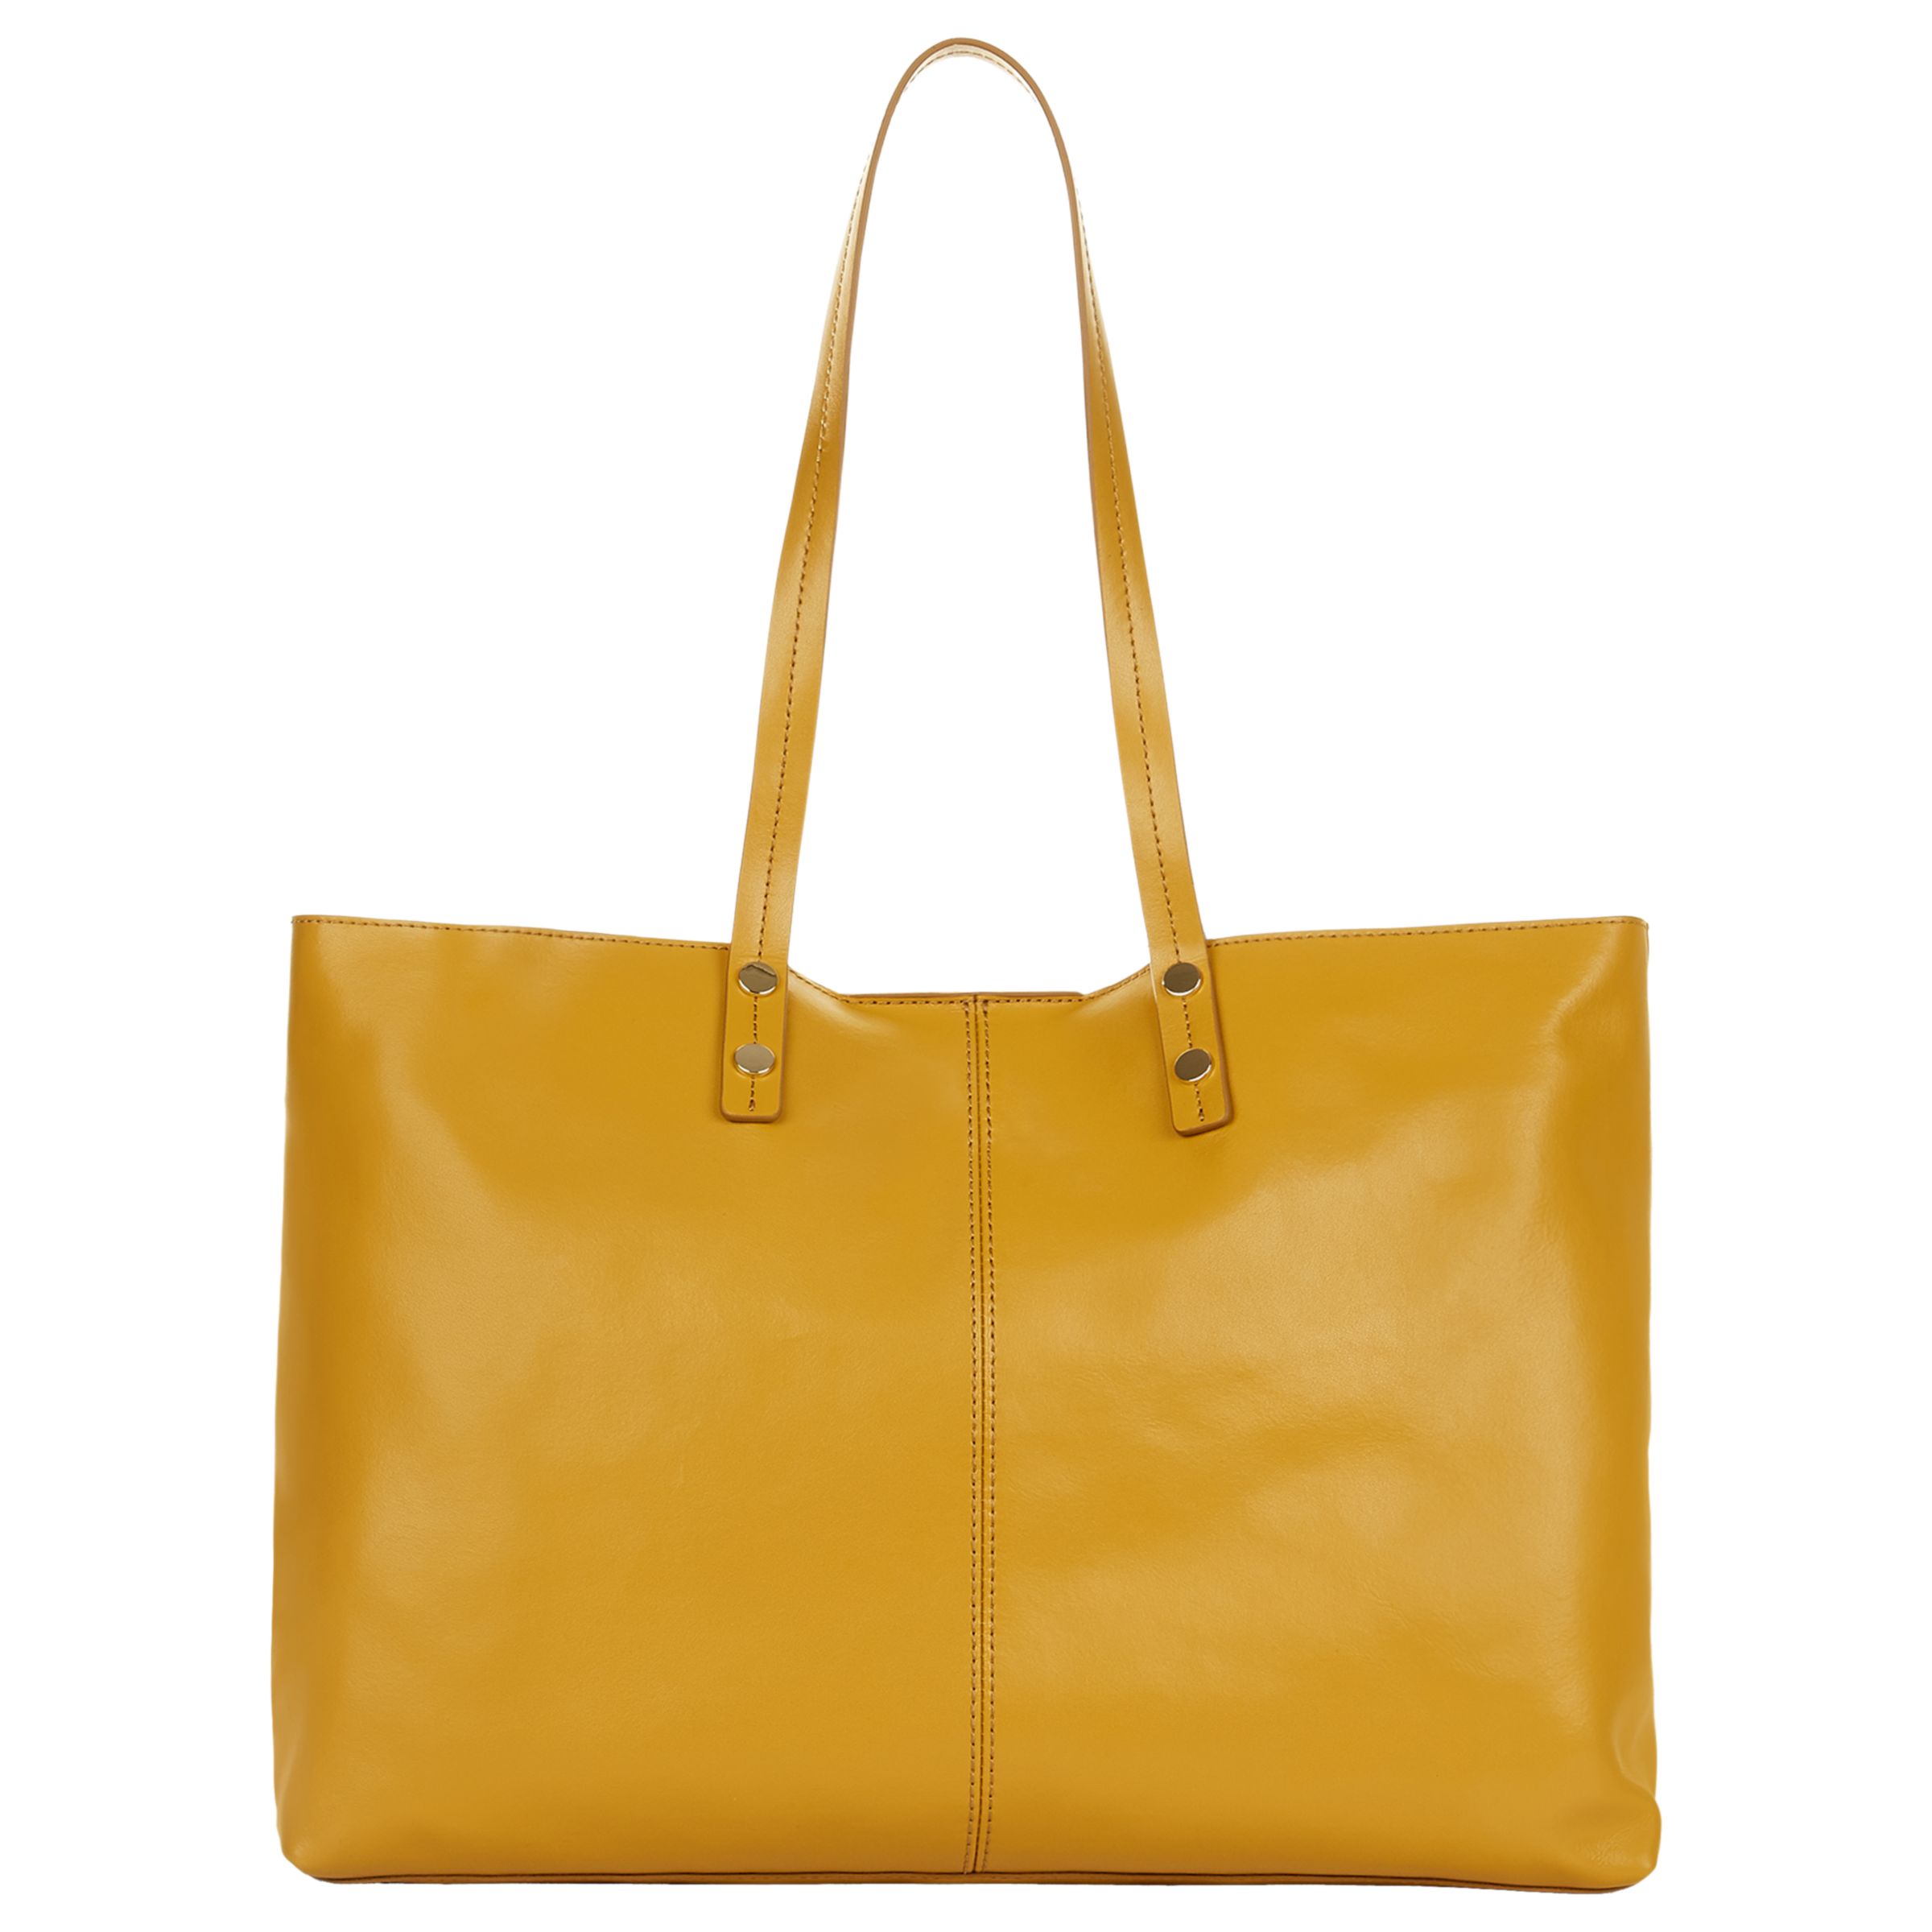 Hobbs Richmond Leather Large Tote Bag, Ochre